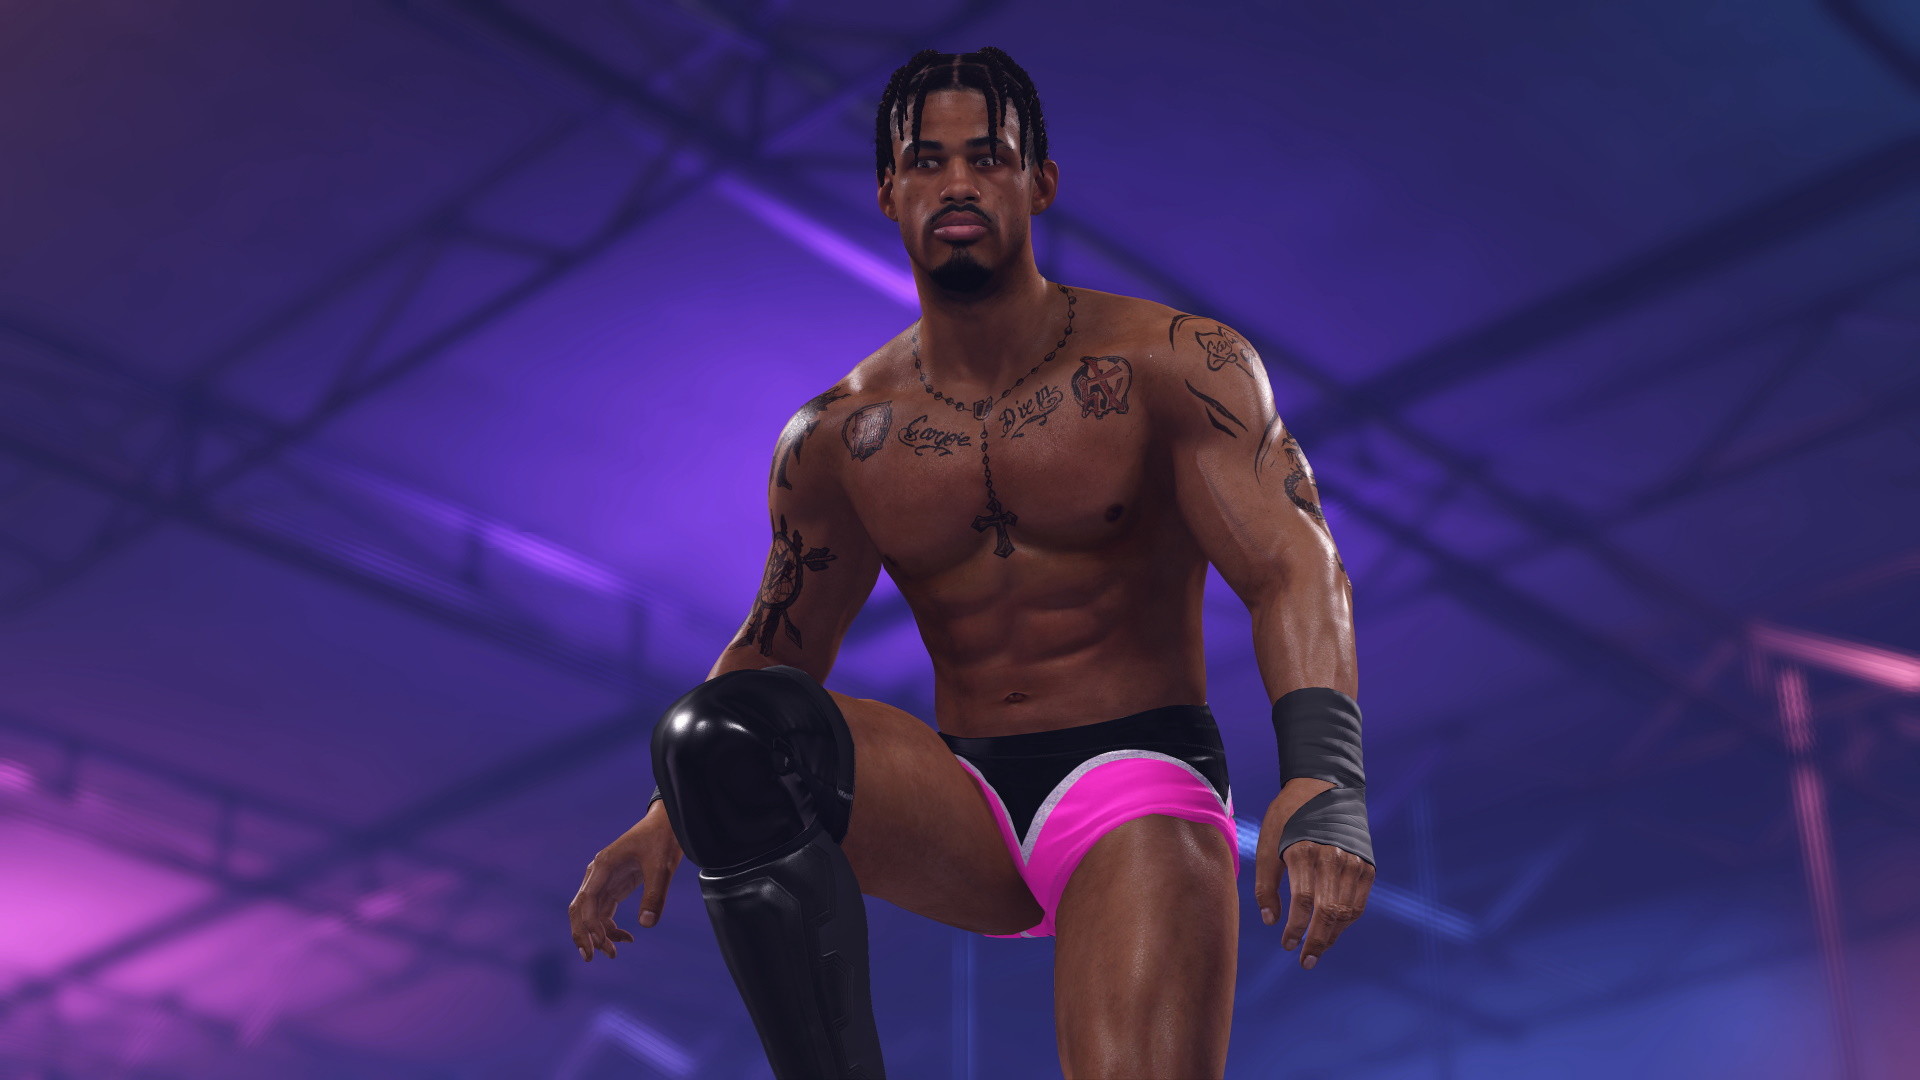 WWE 2K22 - Most Wanted Pack no Steam